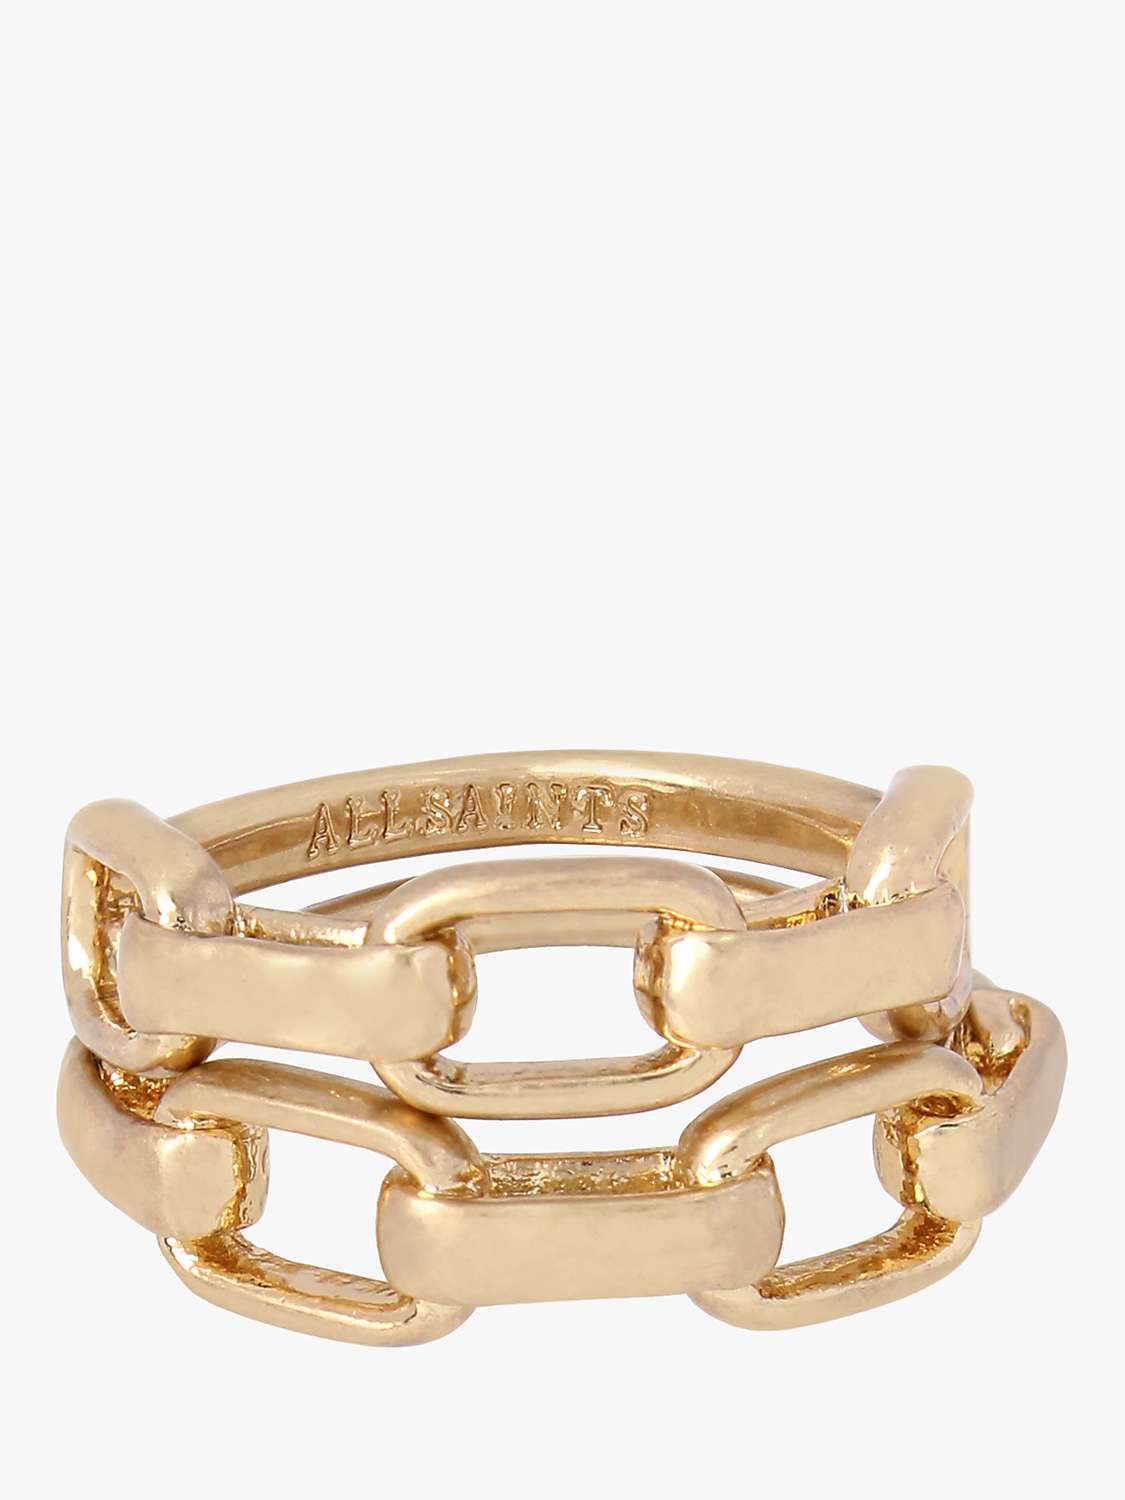 Buy AllSaints Link Stacking Rings, Warm Brass, Pack of 2 Online at johnlewis.com